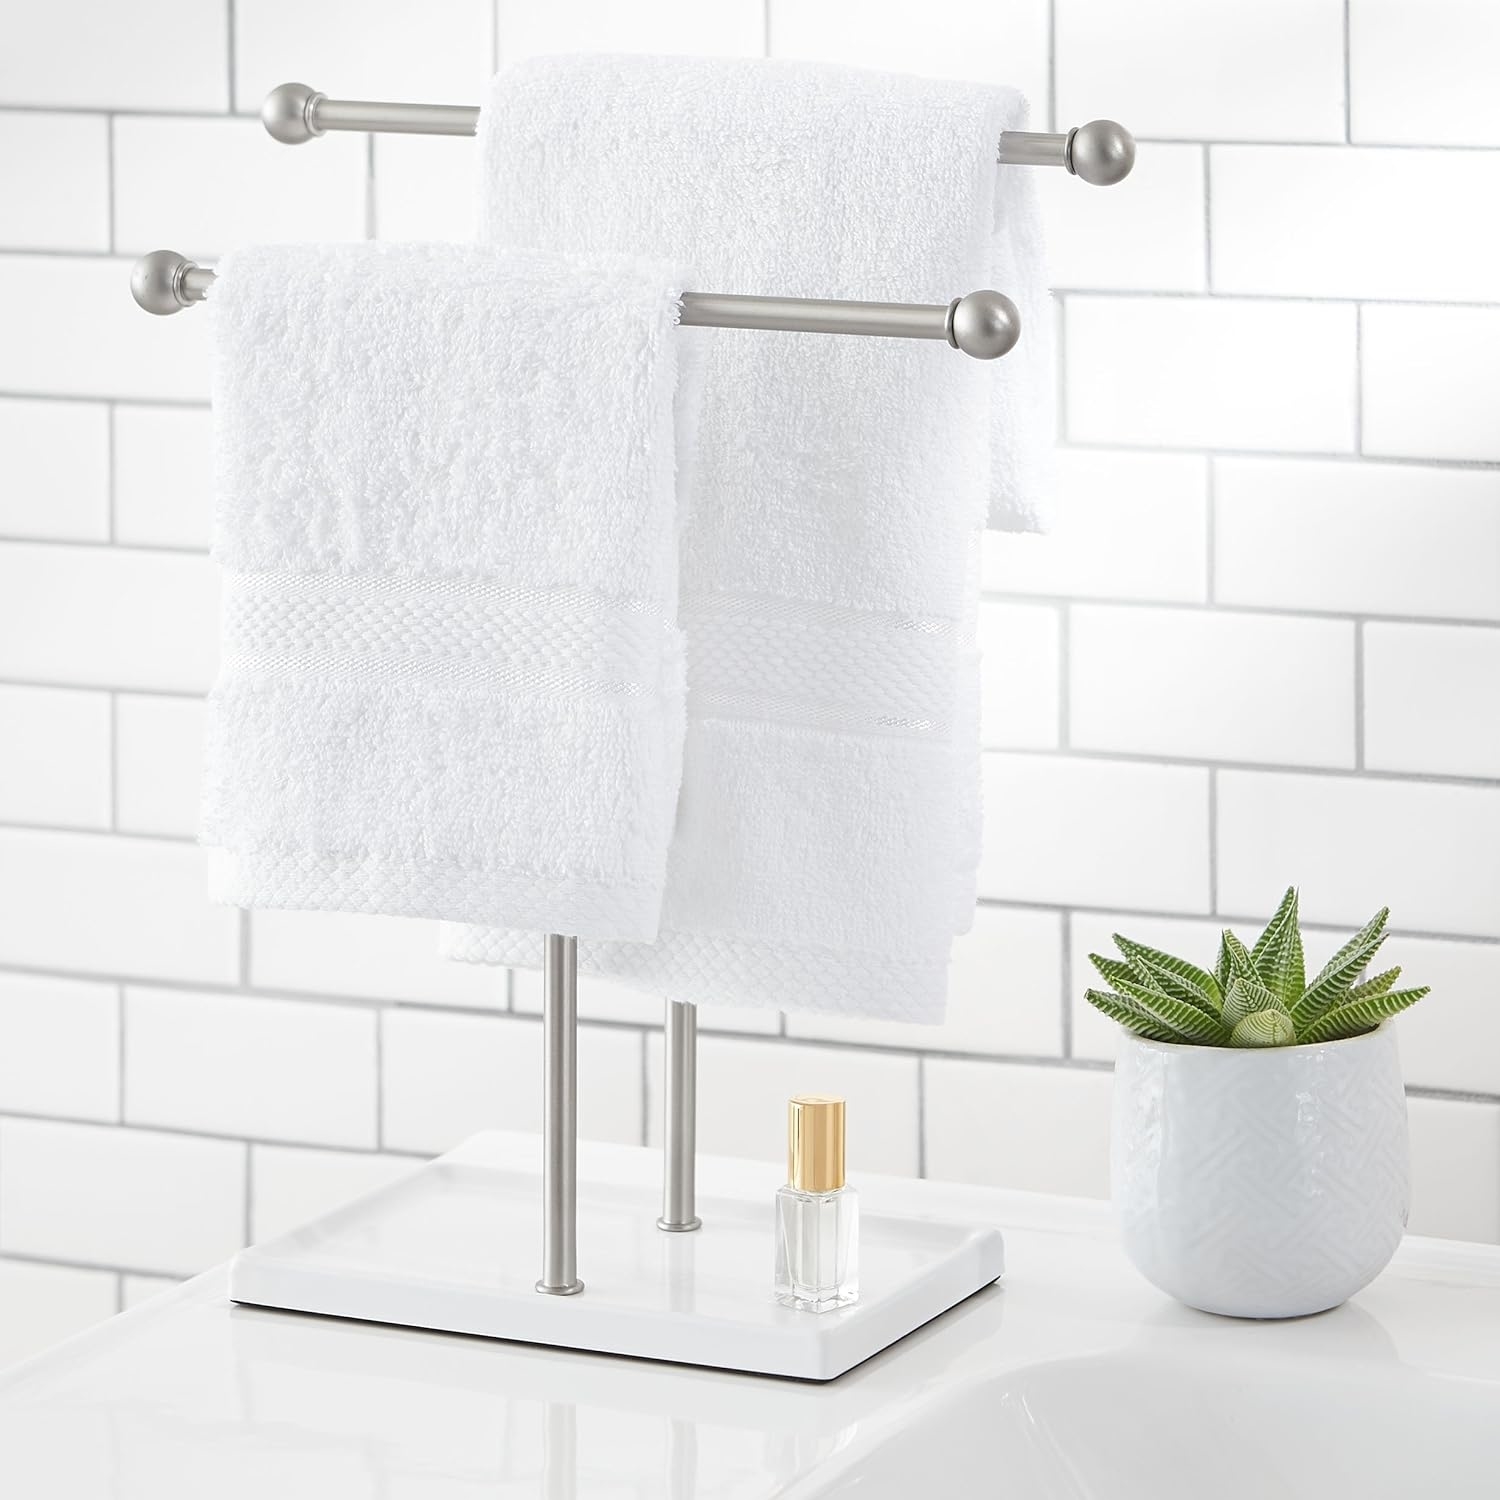 the two-tier towel holder in silver with hand towels hanging from each one